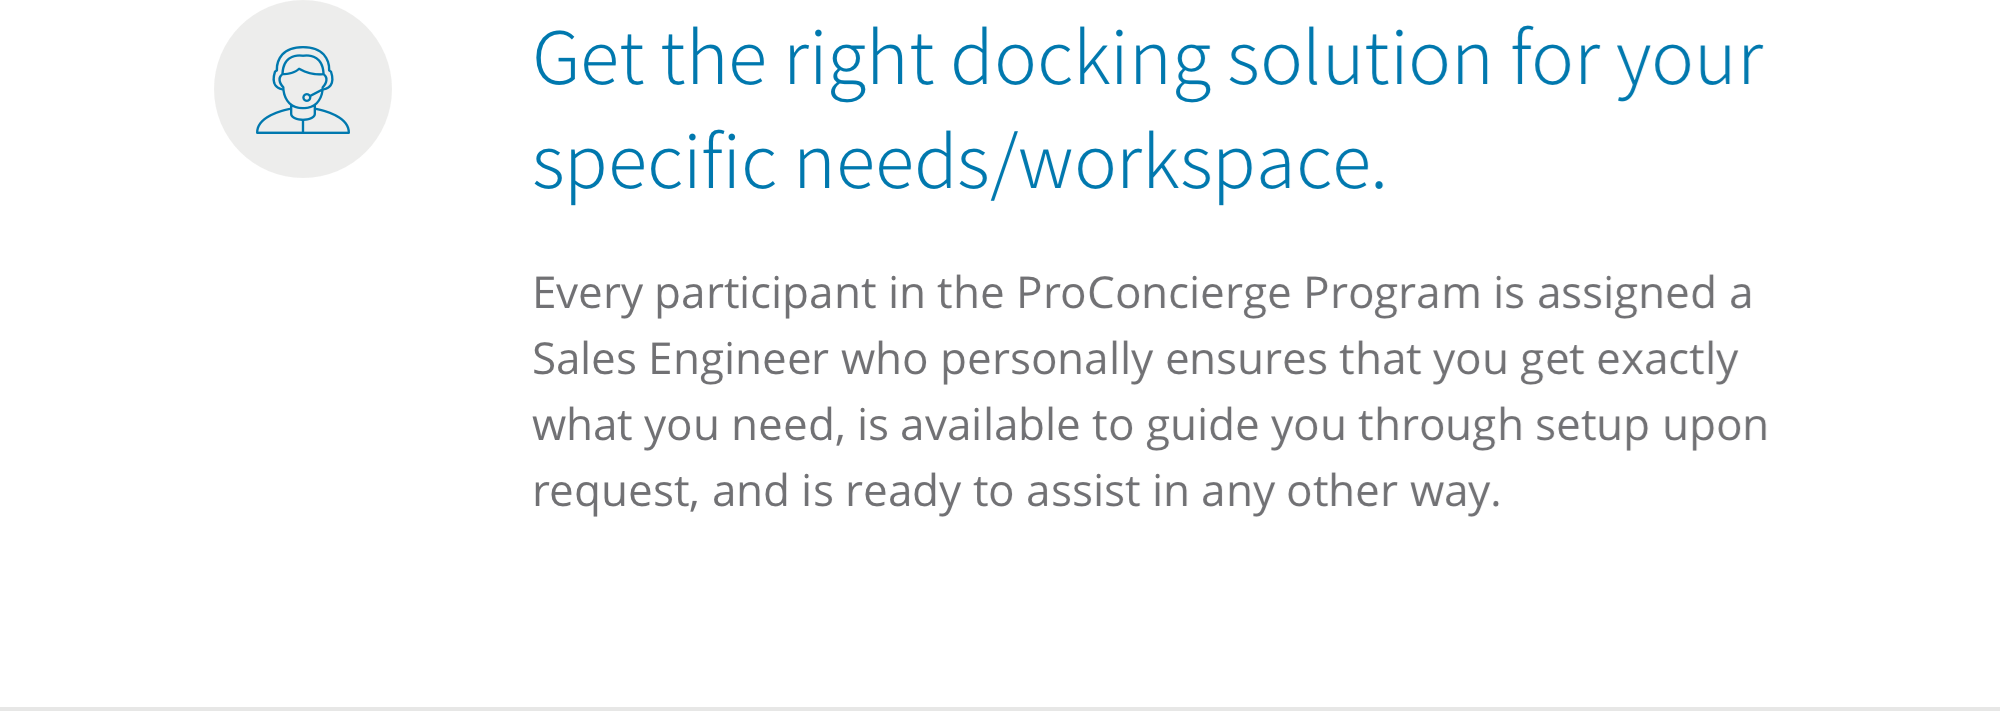 01.Get the Right Docking@2x.png